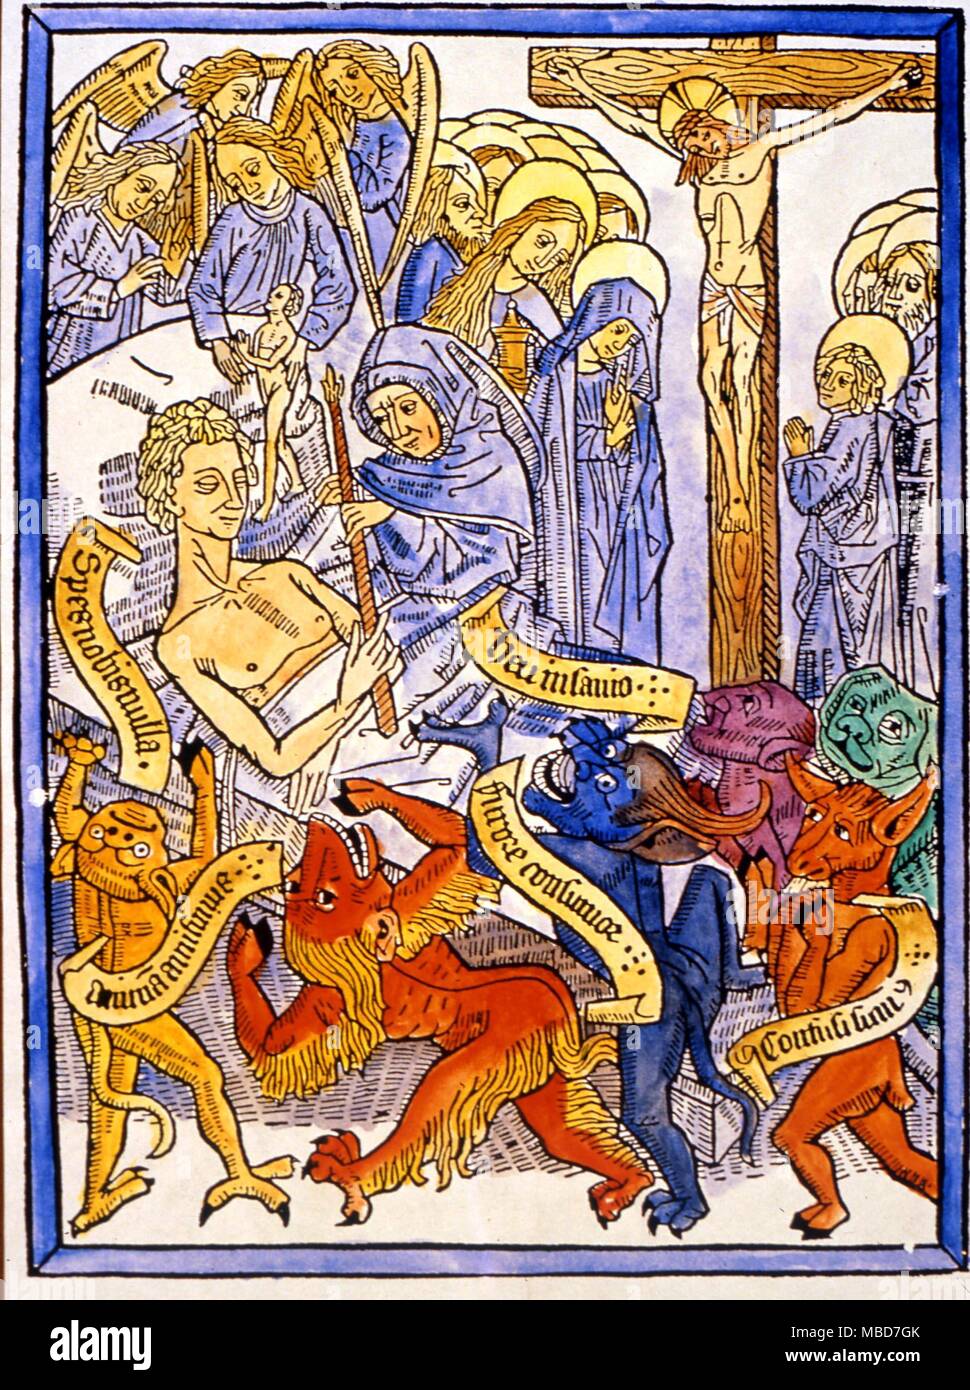 Hordes of demons at a deathbed, waiting to struggle for the soul of the newly deceased. From a hand-coloured 'Ars Morendi Bene' circa 1460 Stock Photo